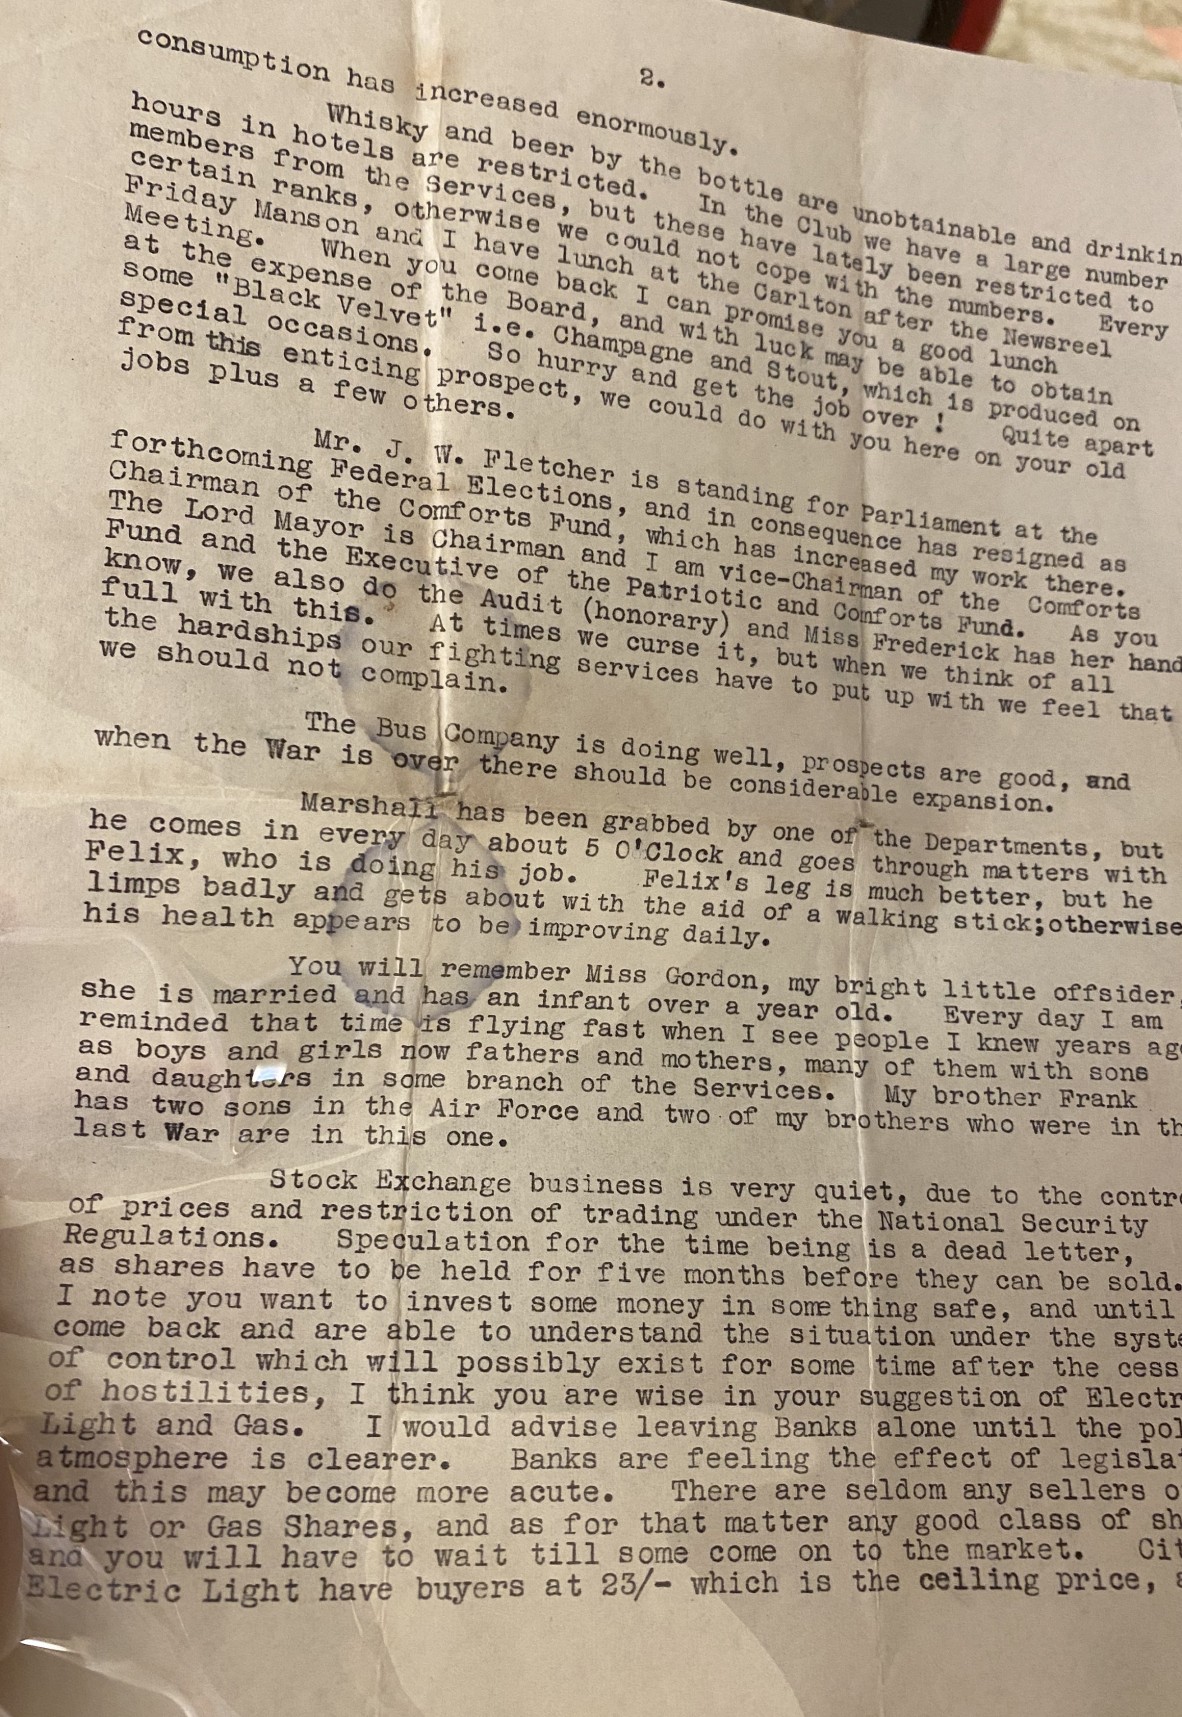 Photograph of letter from Charles Bowly's 1943 Correspondence. 